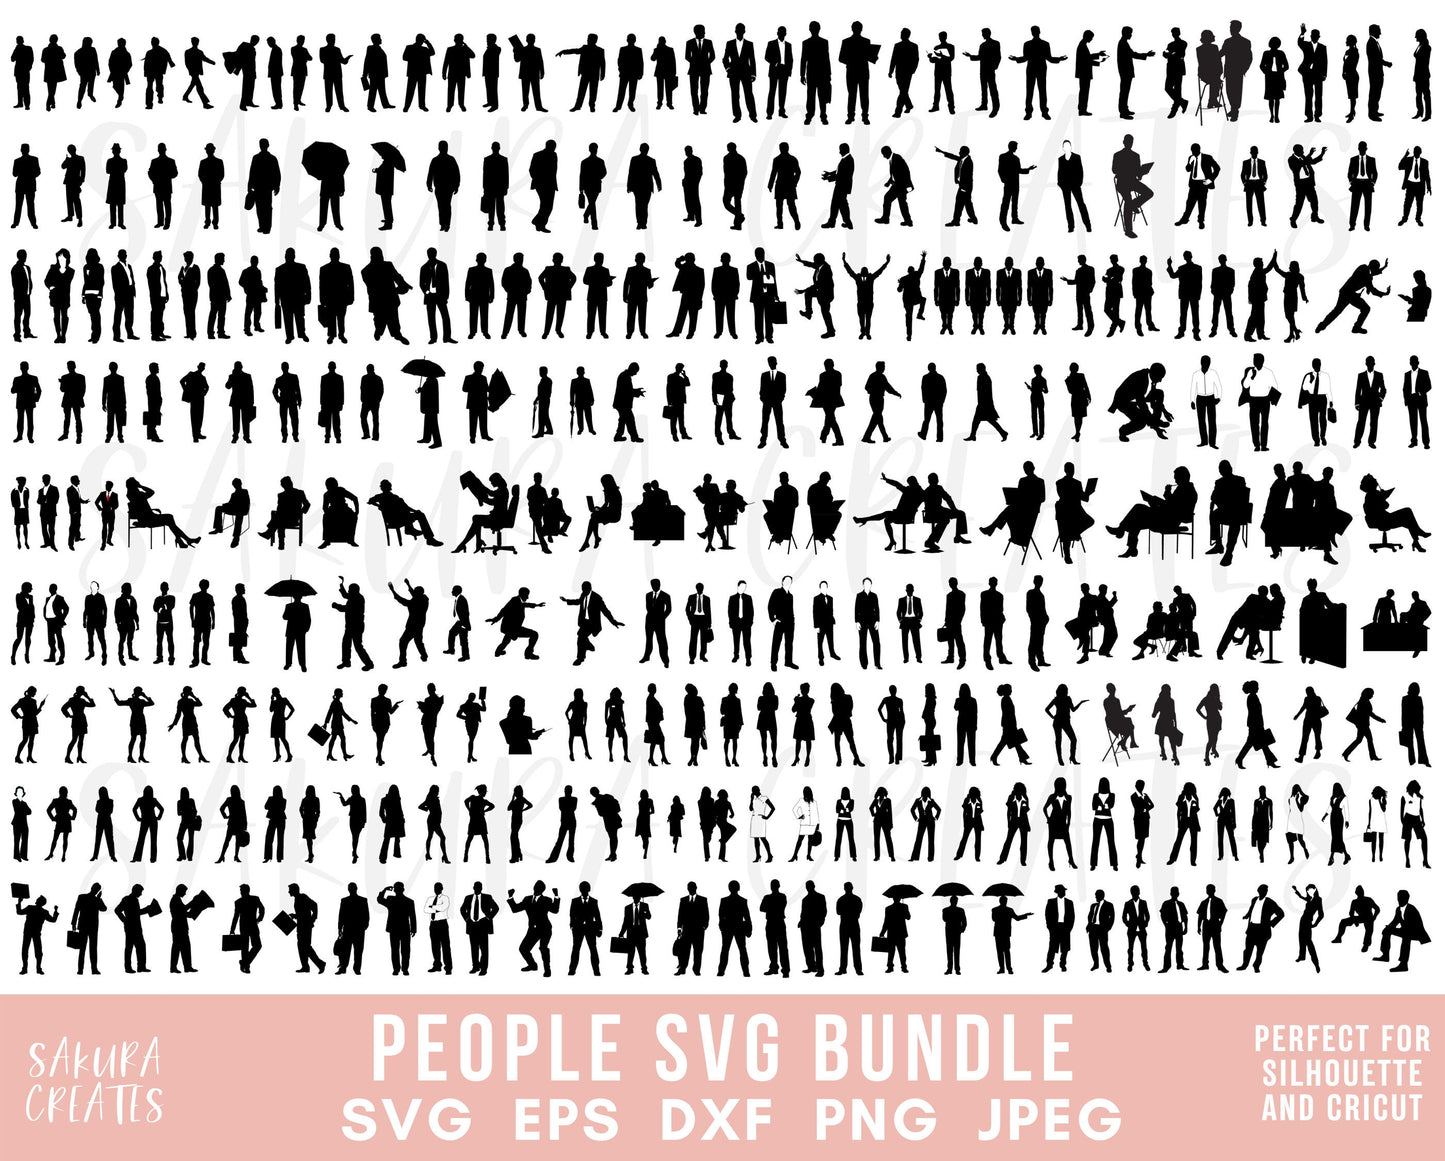 300+ People Silhouette People SVG Business svg Business people Working People Office svg vector people clipart startup architectural cutout